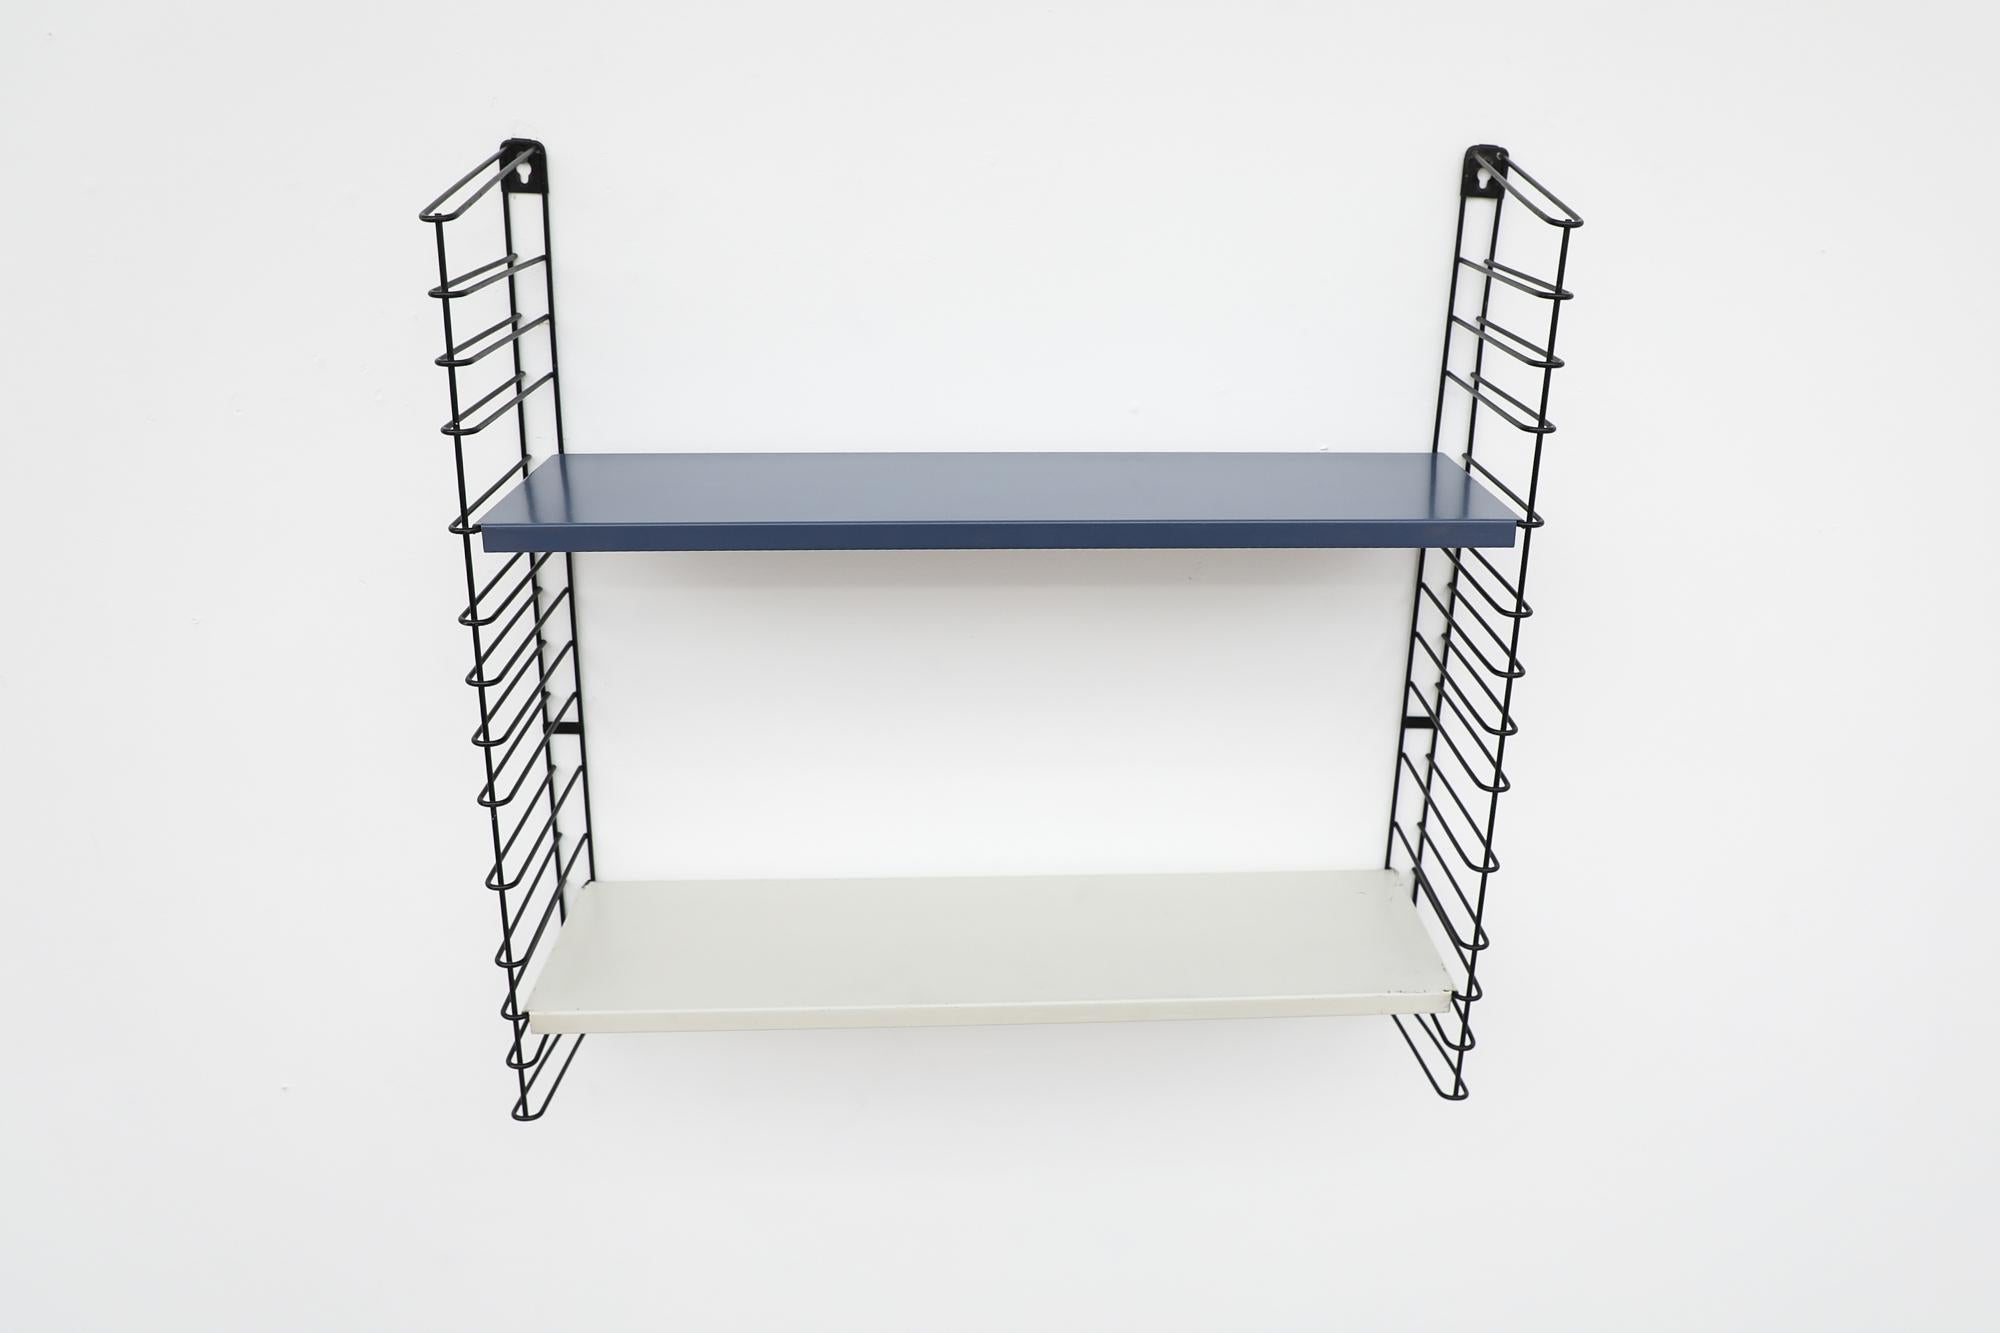 Enameled Mid-Century Tomado Blue and White Industrial Shelving Unit